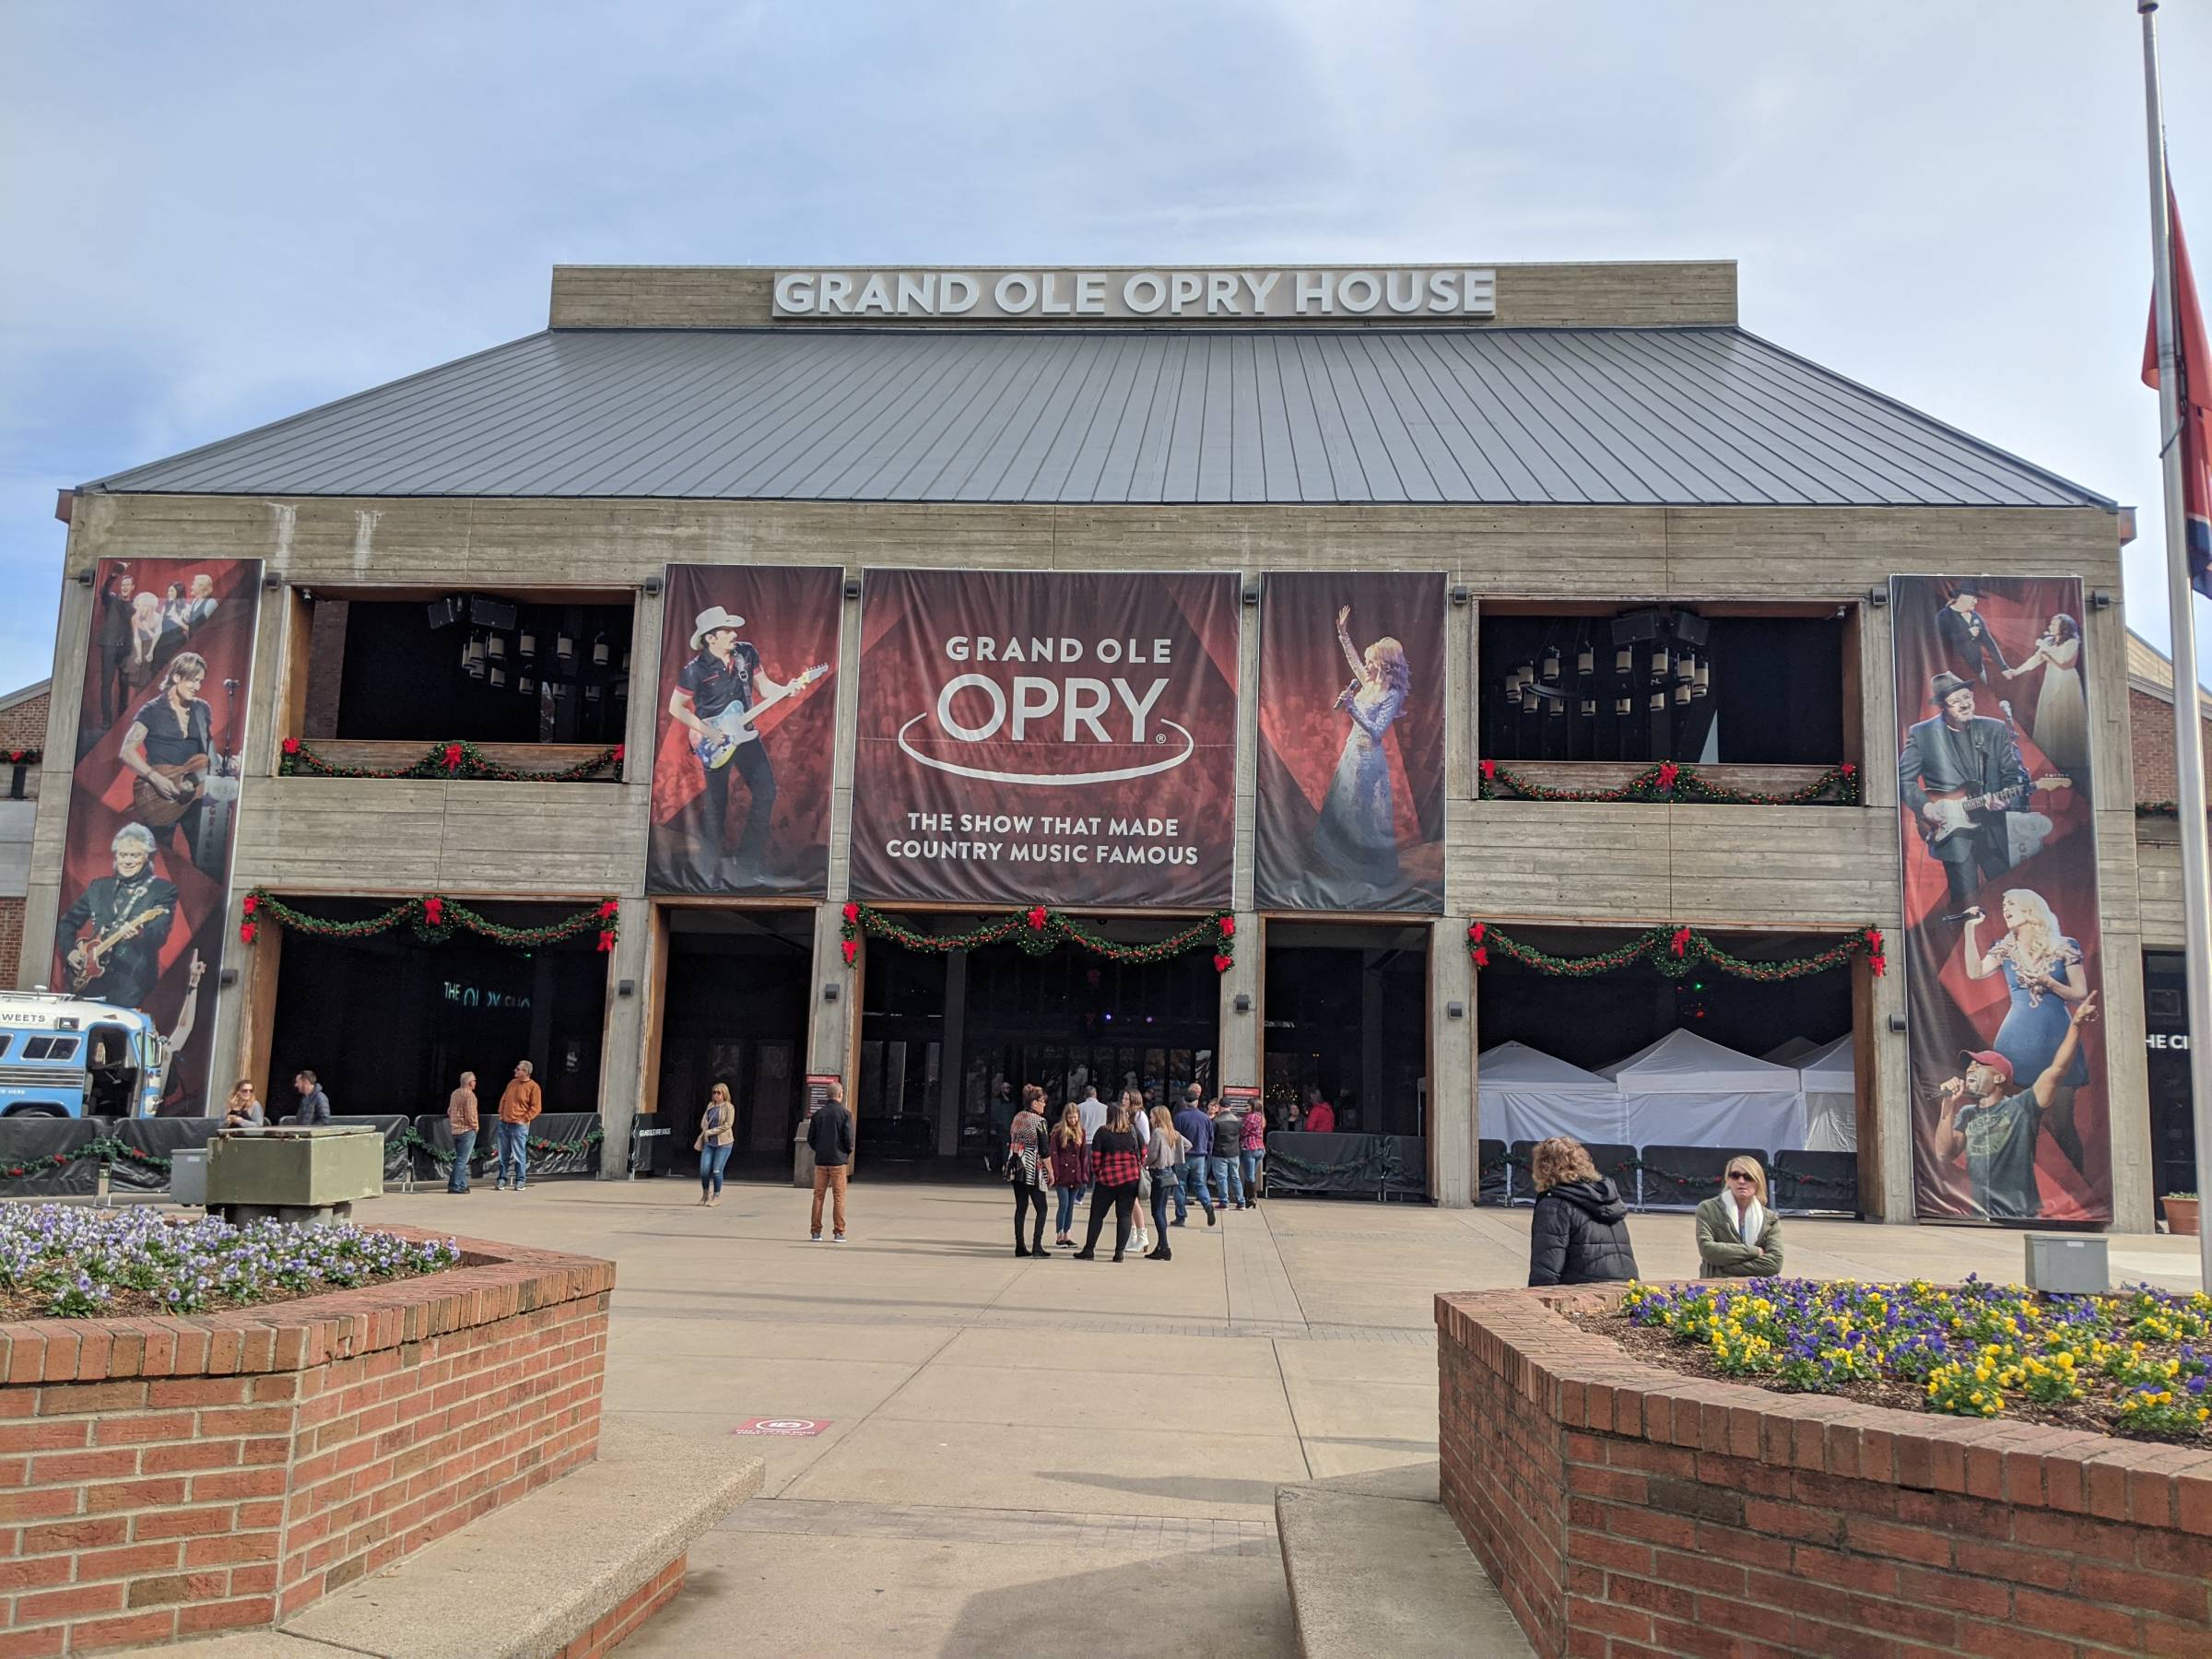 outside grand ole opry house in Nashville